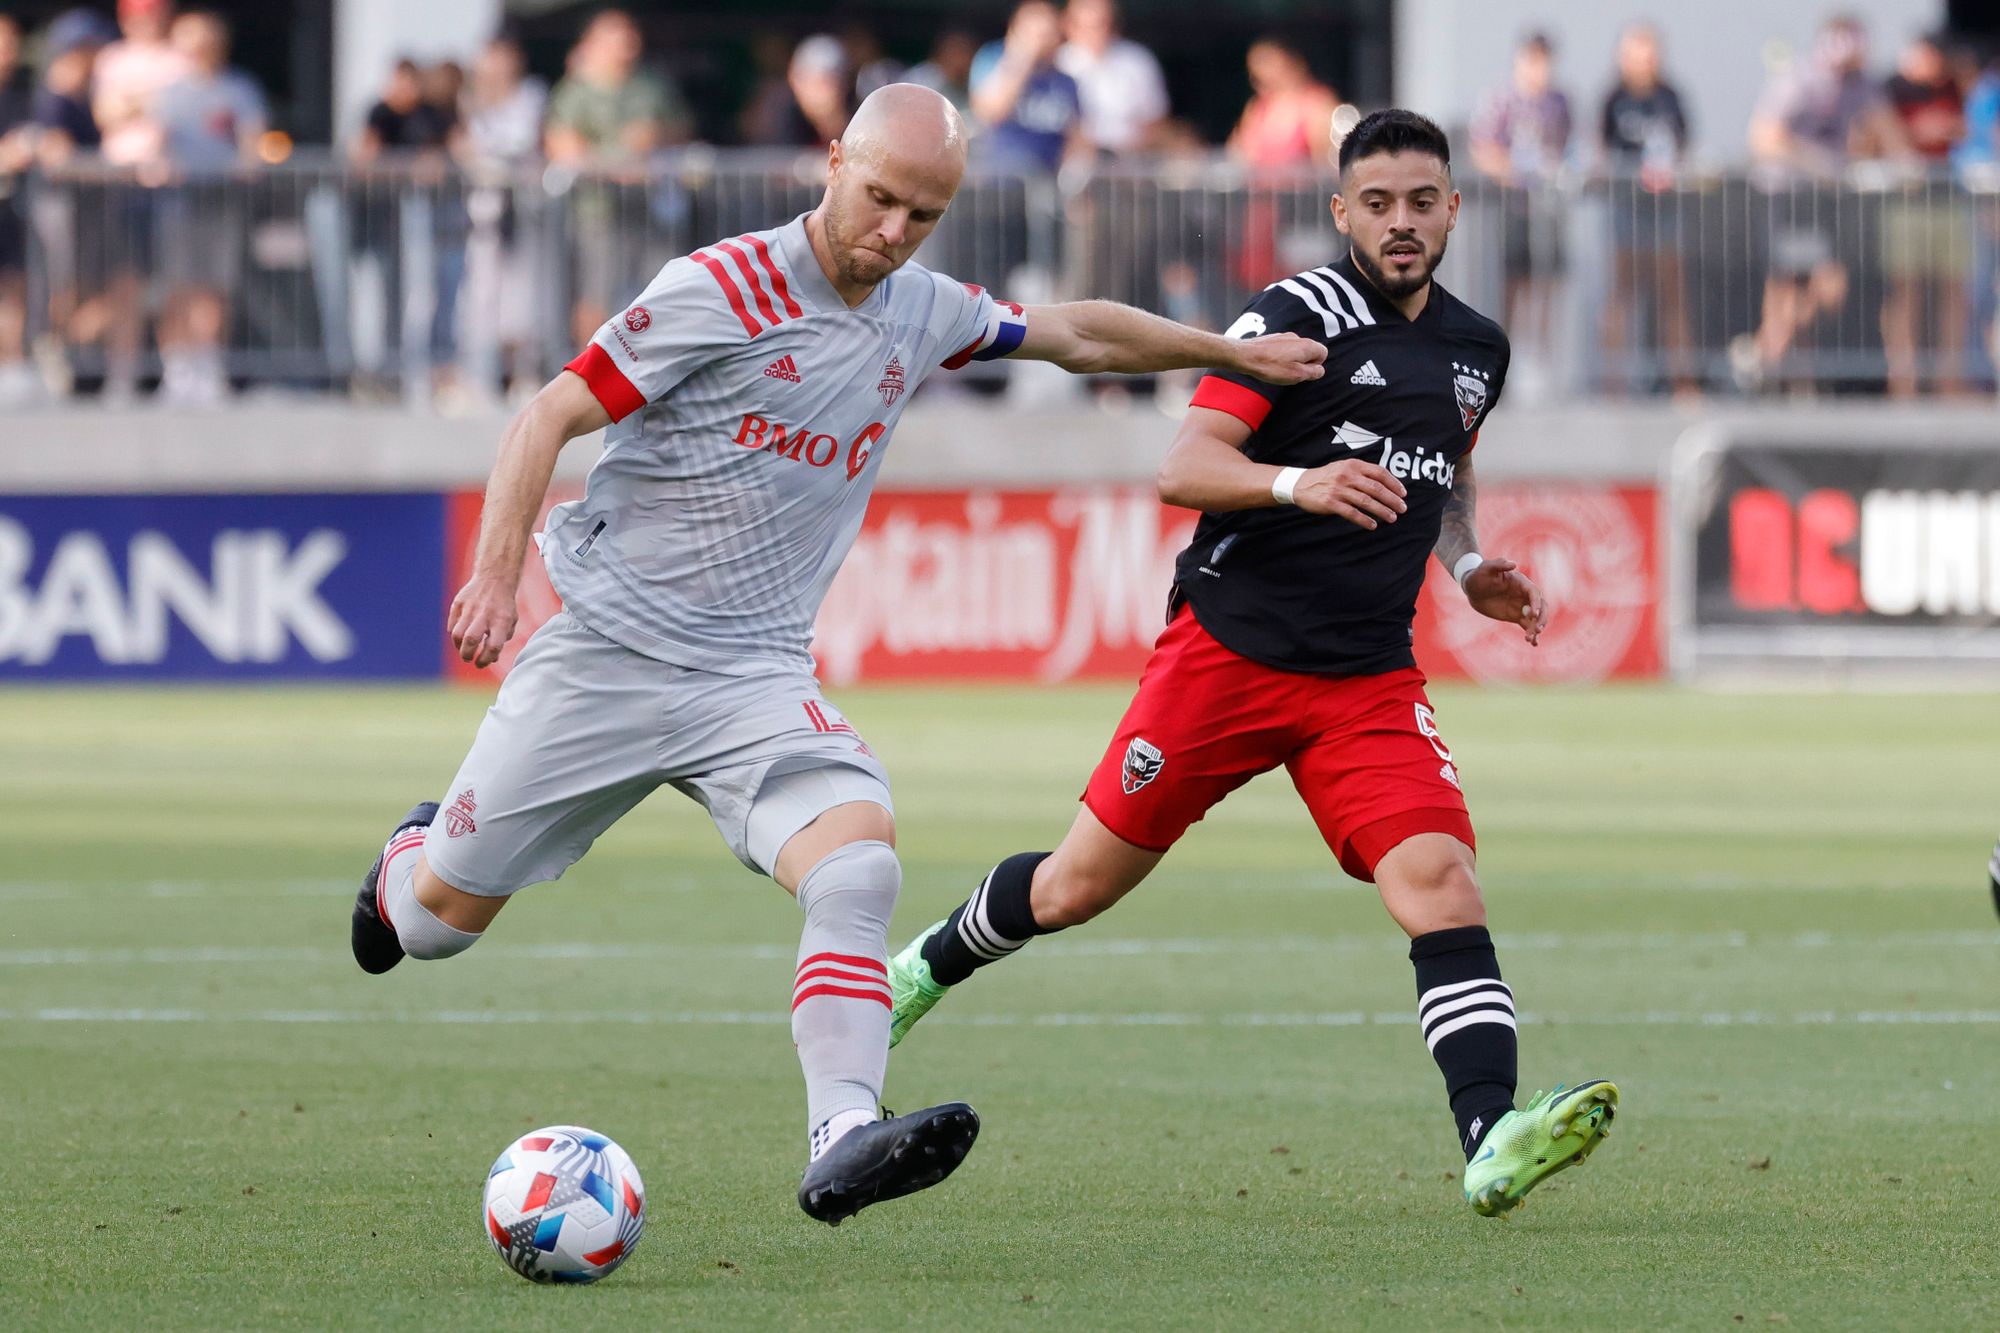 Toronto FC vs. New England Revolution: What you need to know